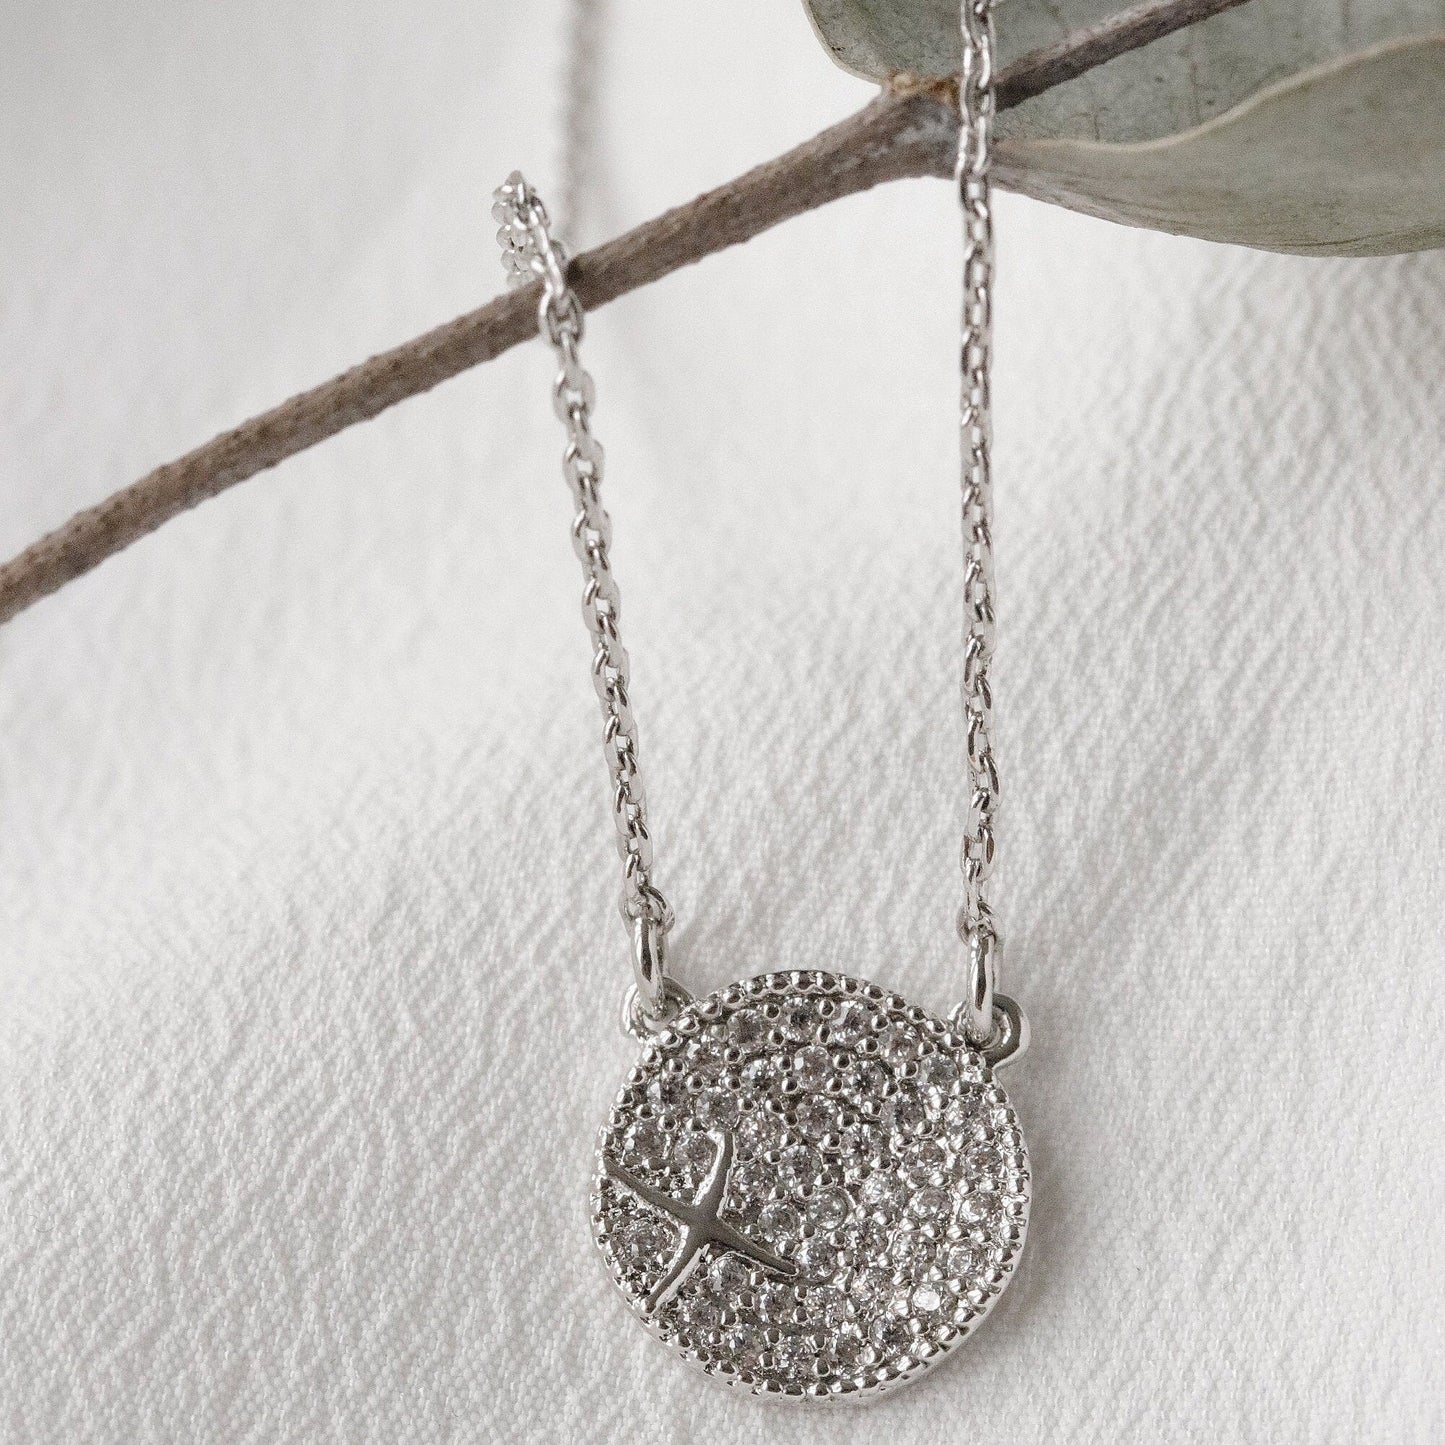 Marvelous Mum Necklace, Handcraft Pave CZ Disc Necklace / Mum and Daughter Gift, Gift for Mum / Mummy to Be Gift, Mother of the Bride Groom